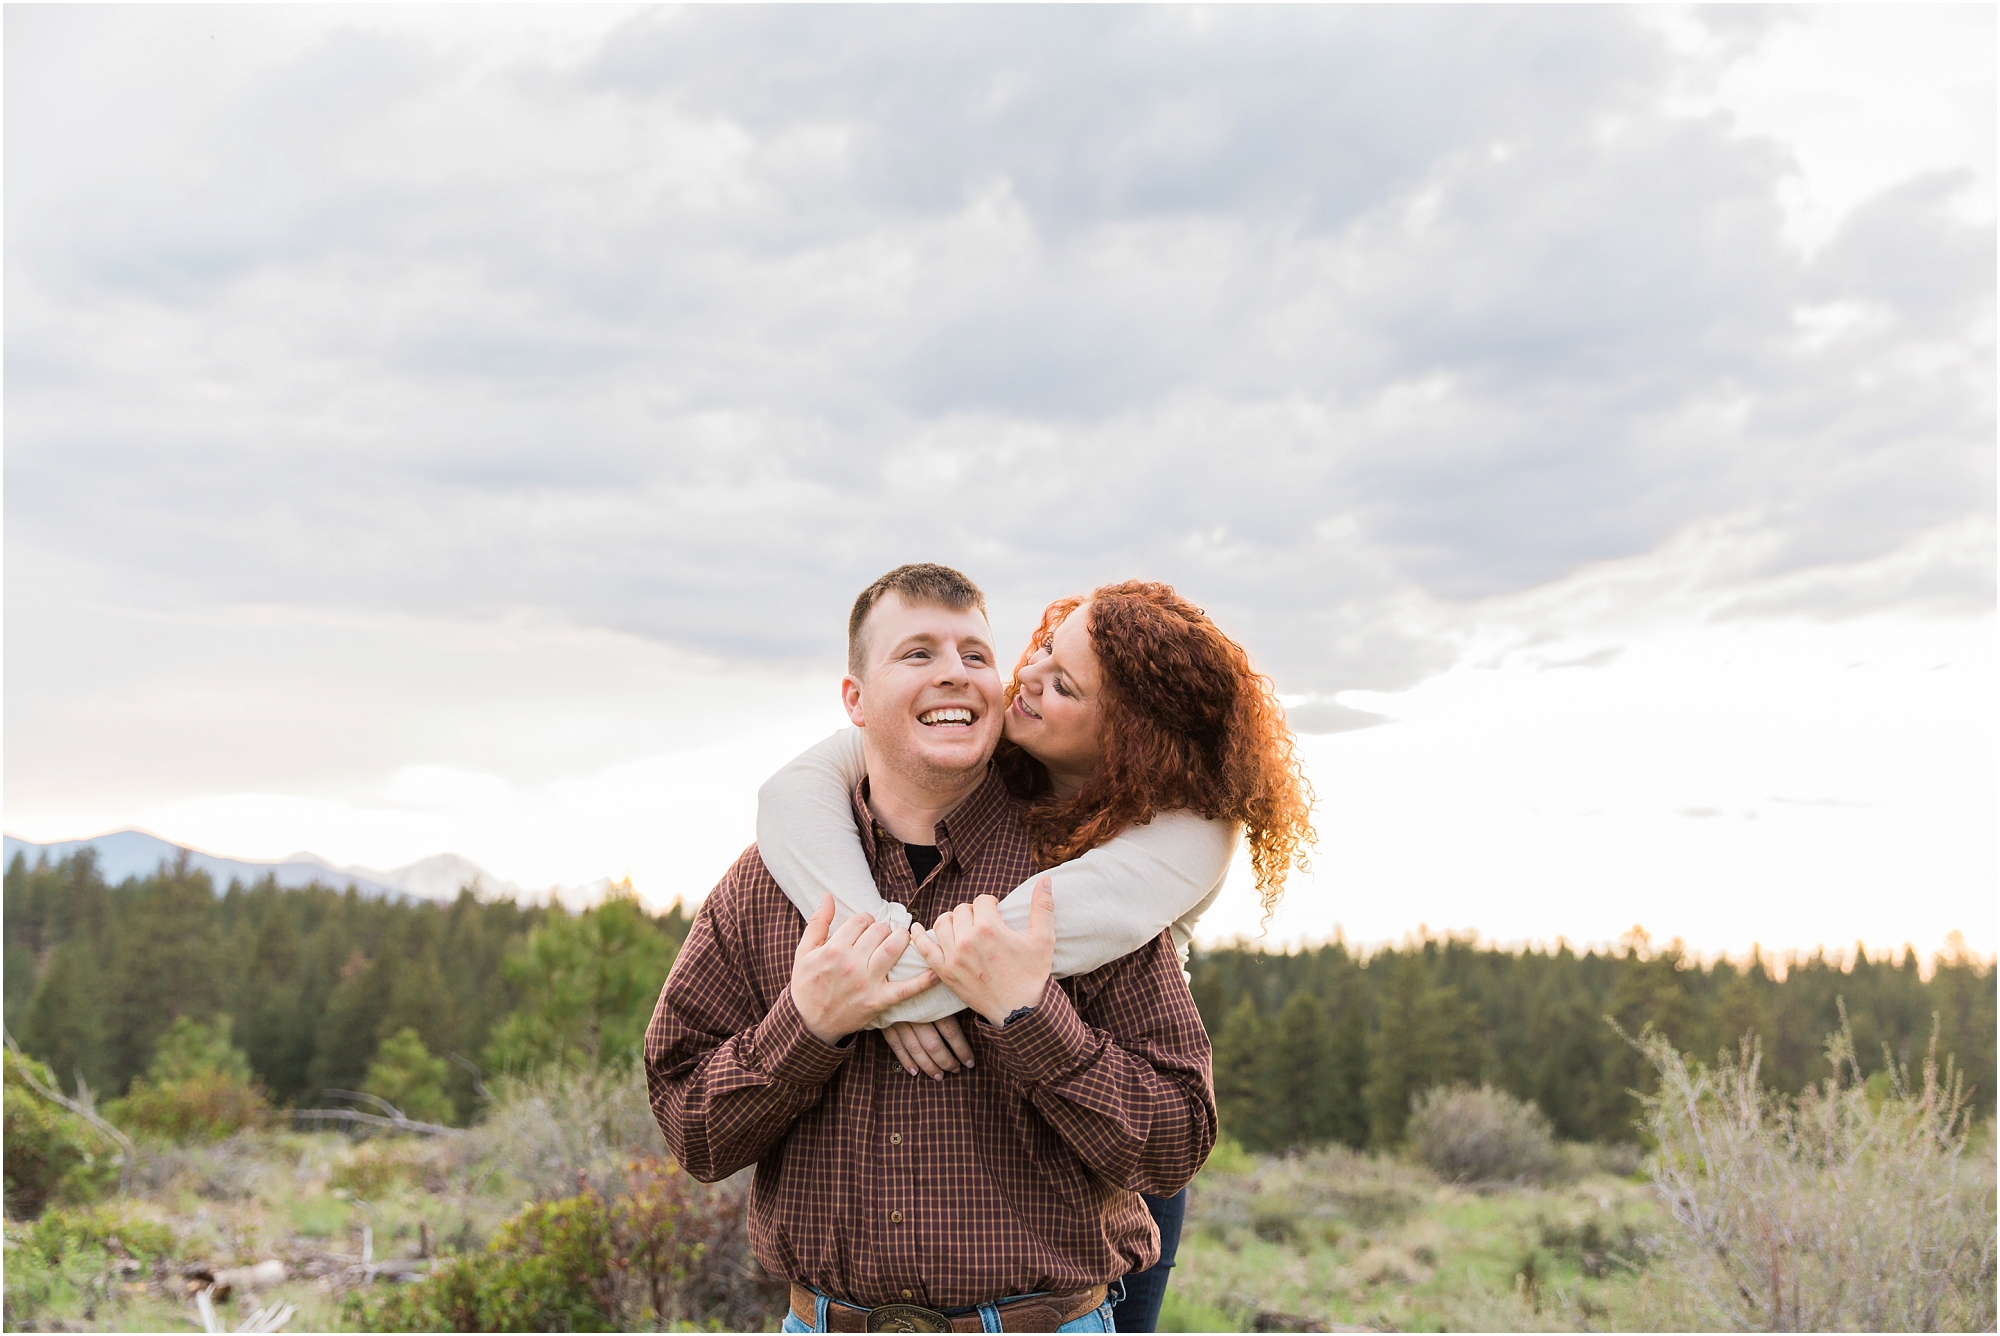 Such an adorable couple at this Shevlin Park engagement session. Photo by Bend Oregon wedding photographer Erica Swantek. 